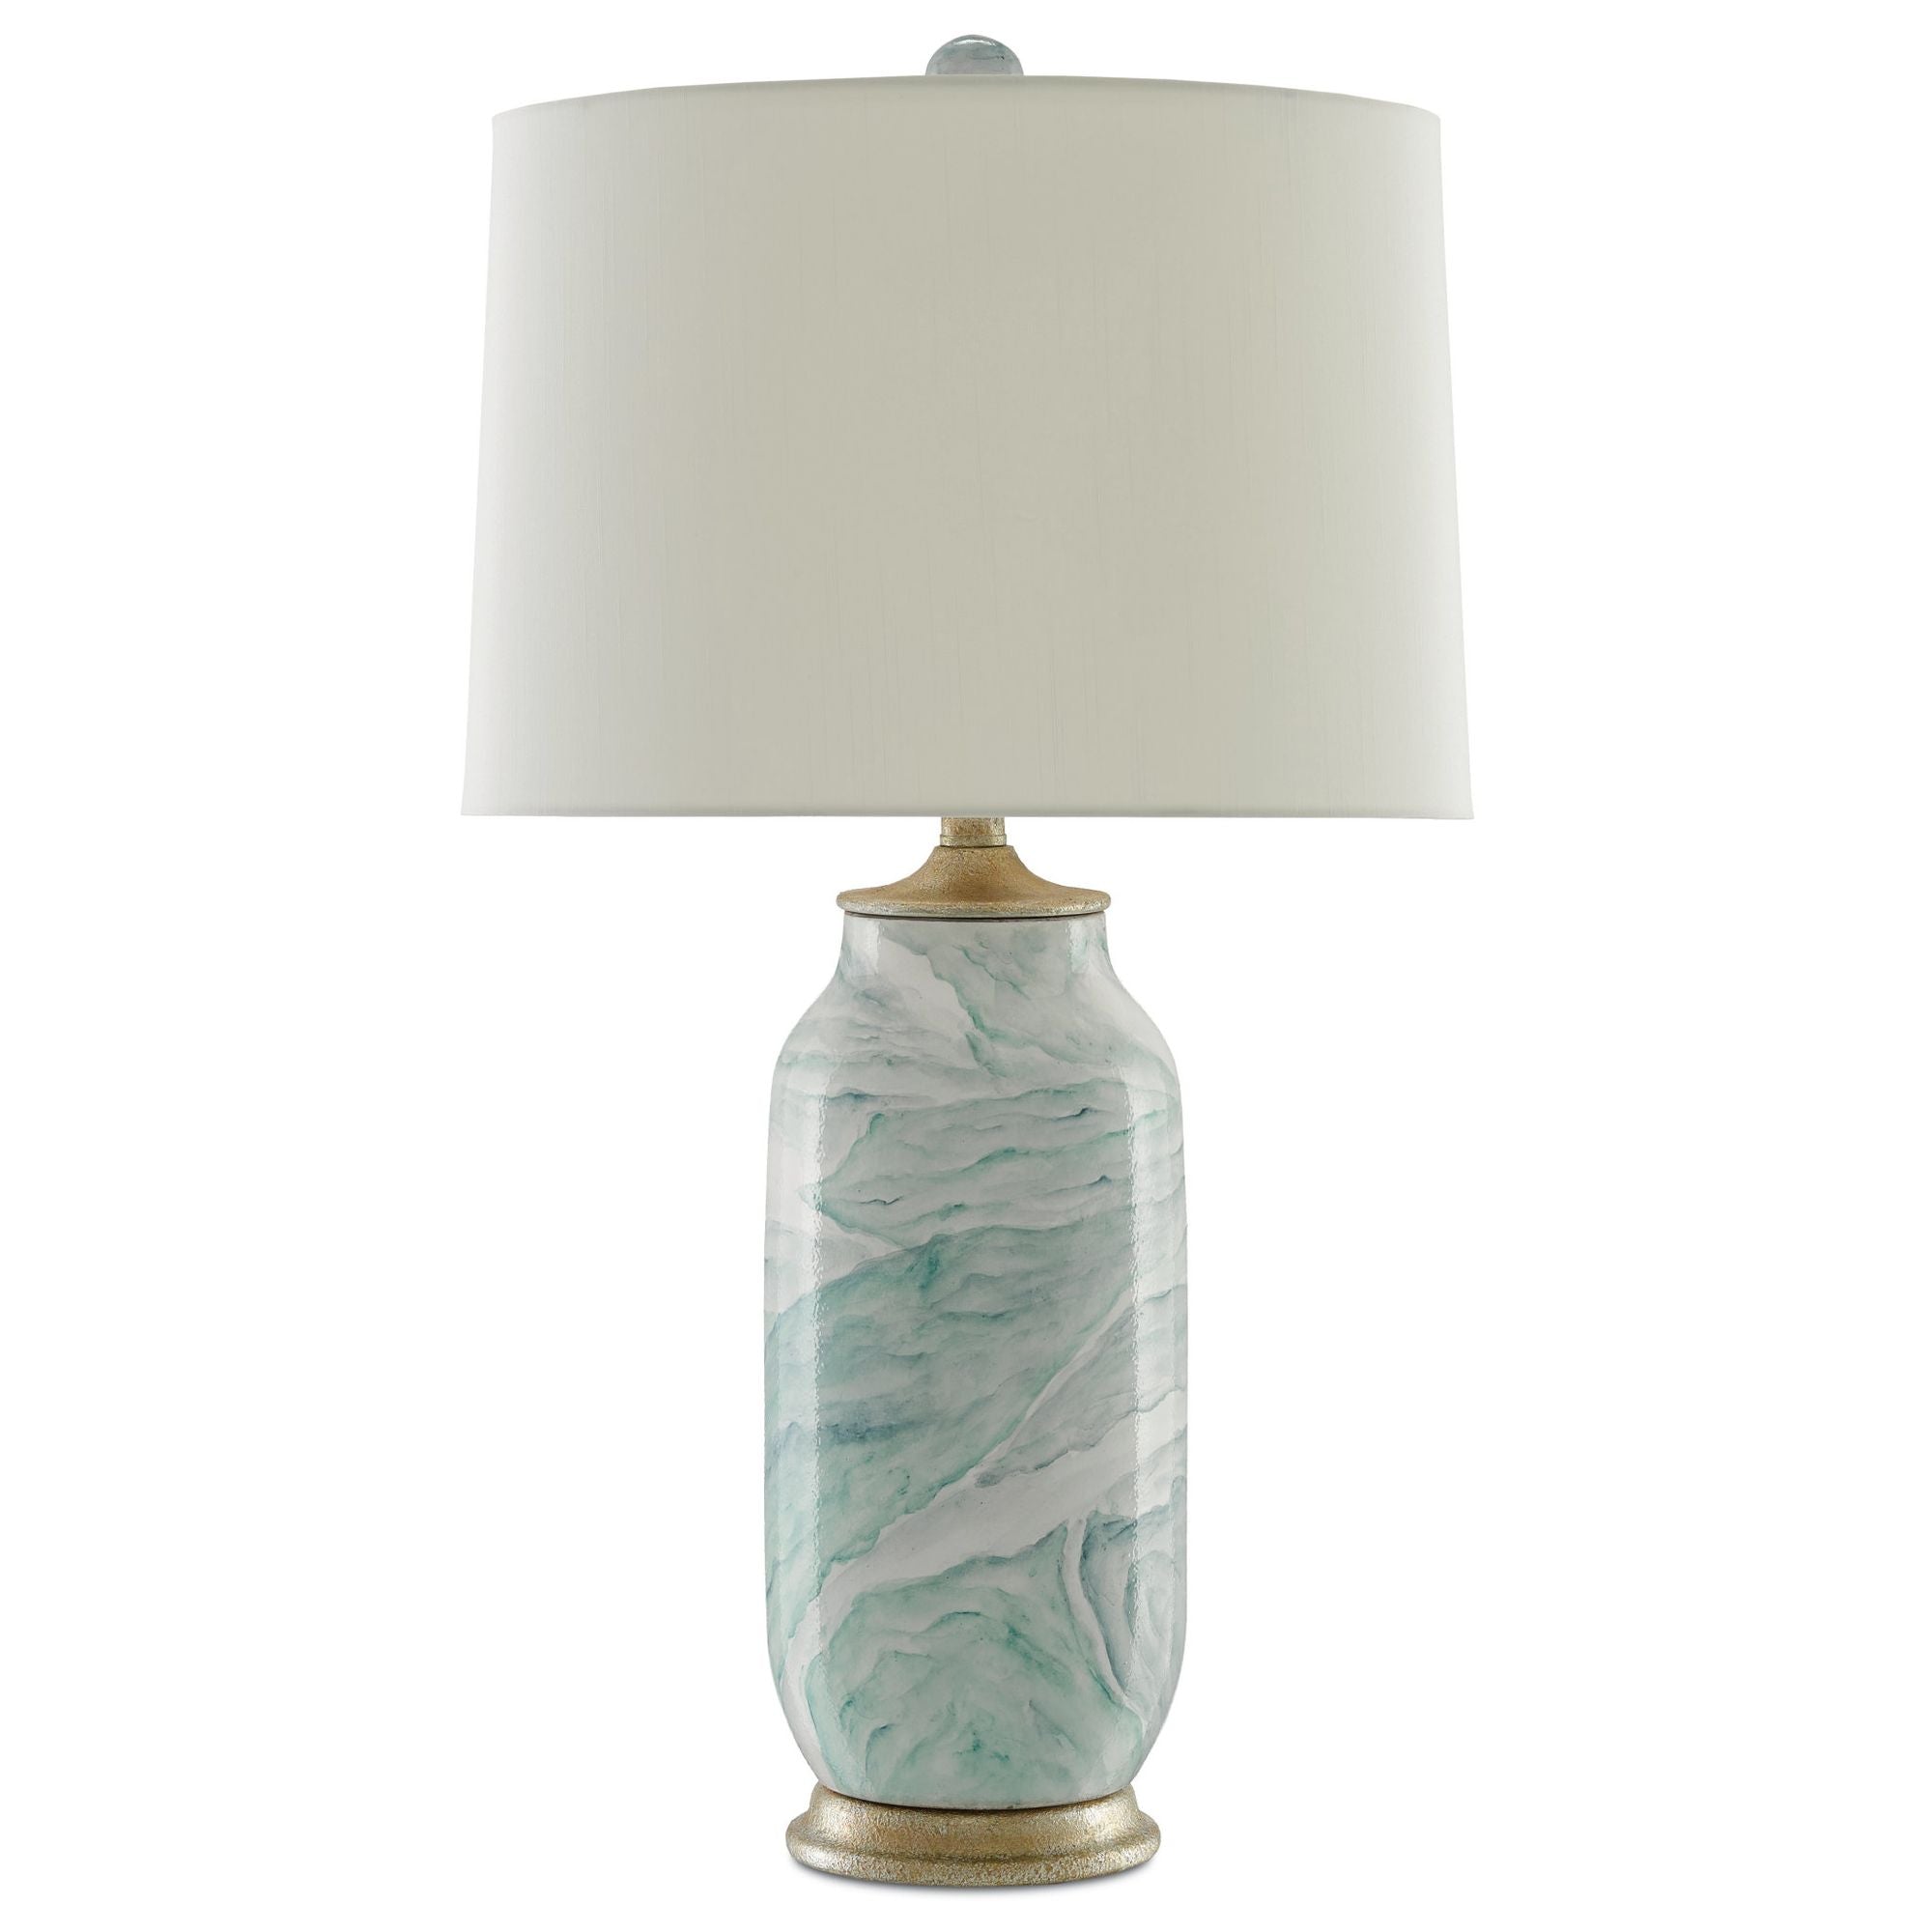 Sarcelle Table Lamp - Sea Foam/Harlow Silver Leaf